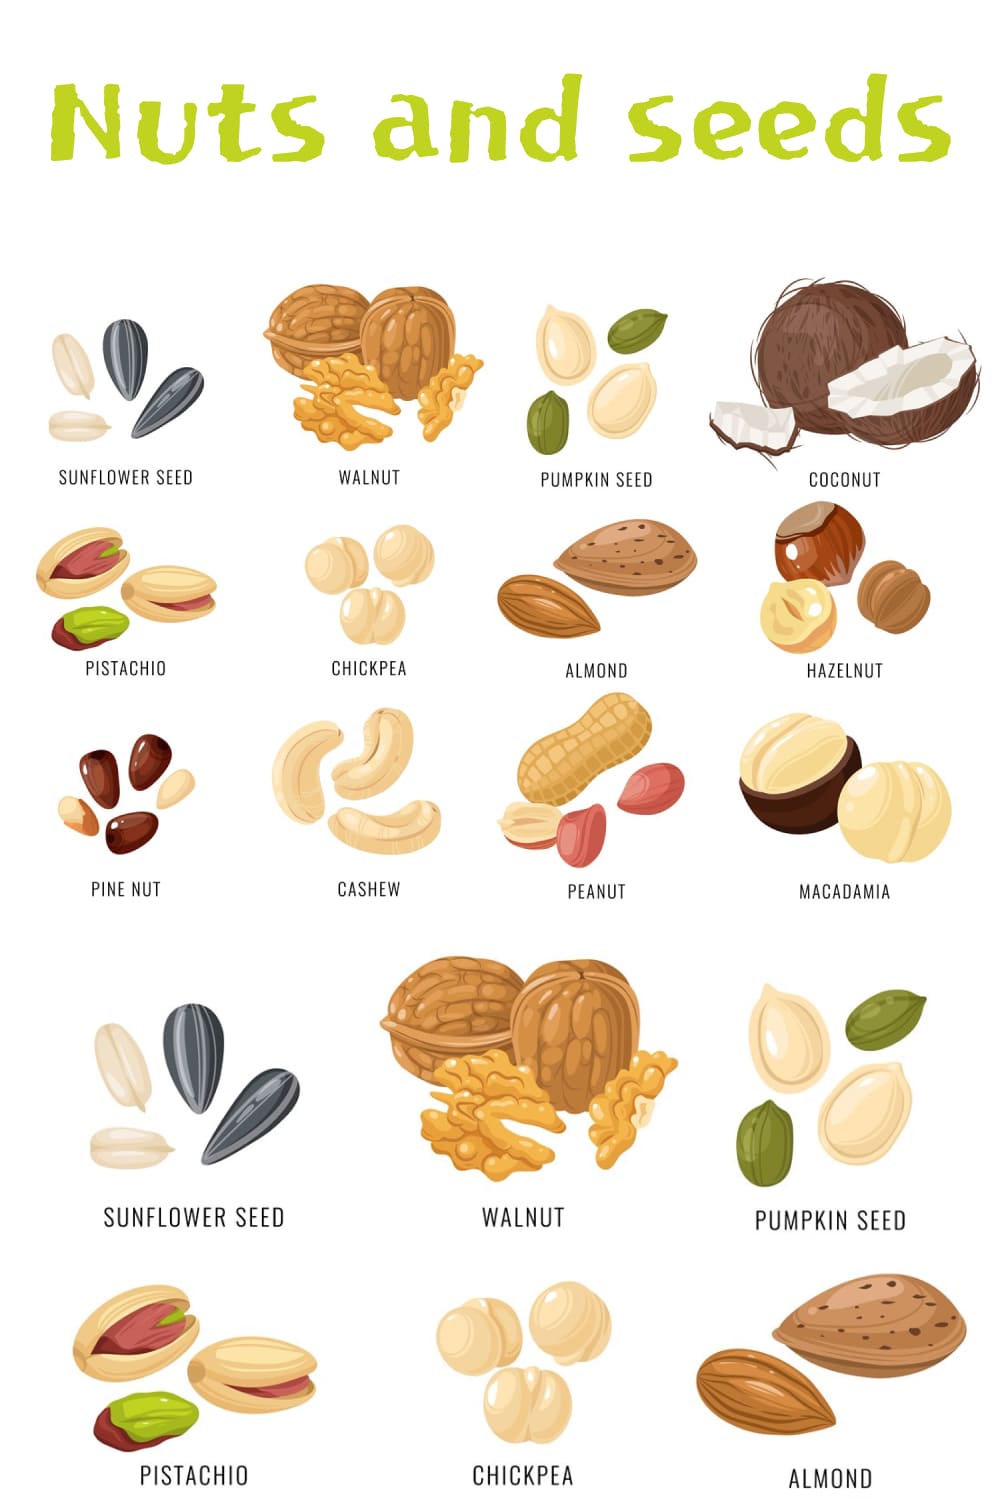 Nuts and seeds, picture for Pinterest 1000x1500.